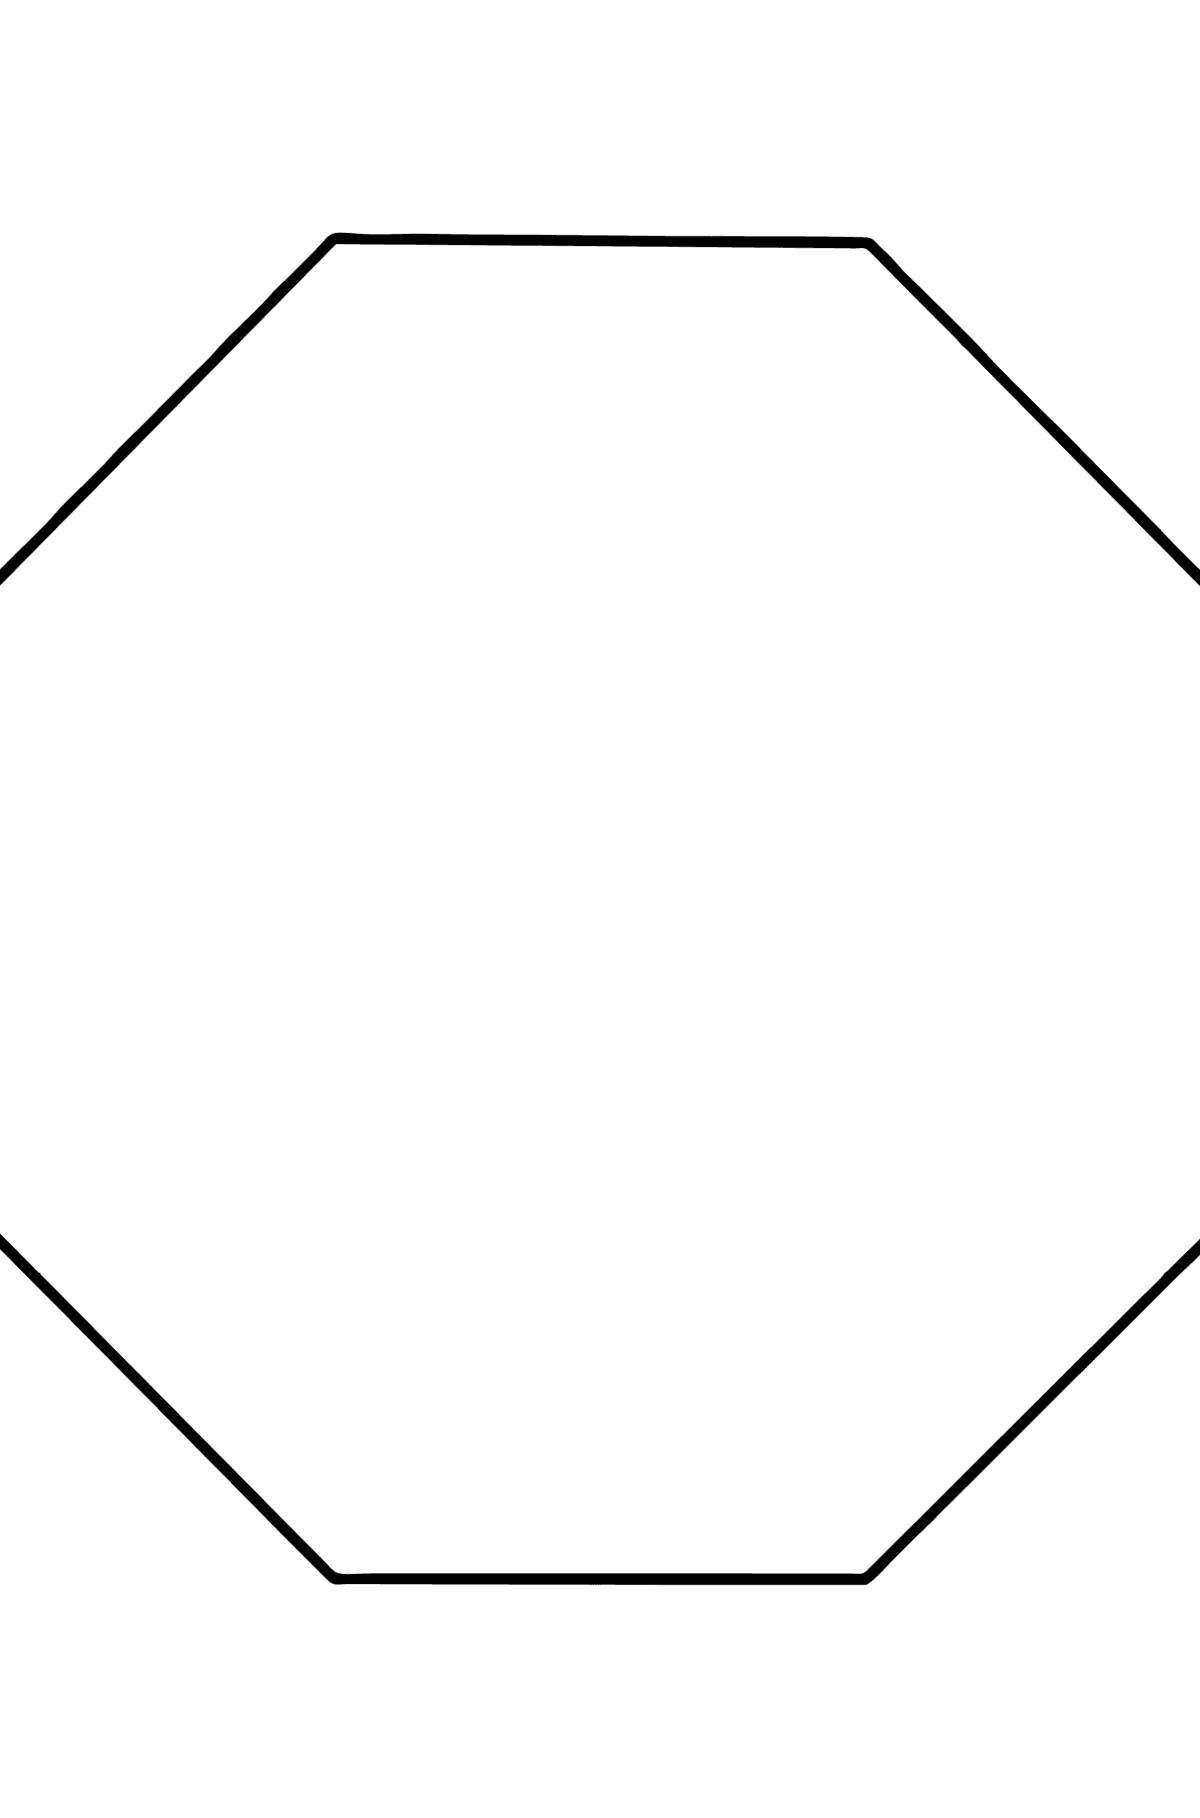 Hexagon coloring page - Coloring Pages for Kids